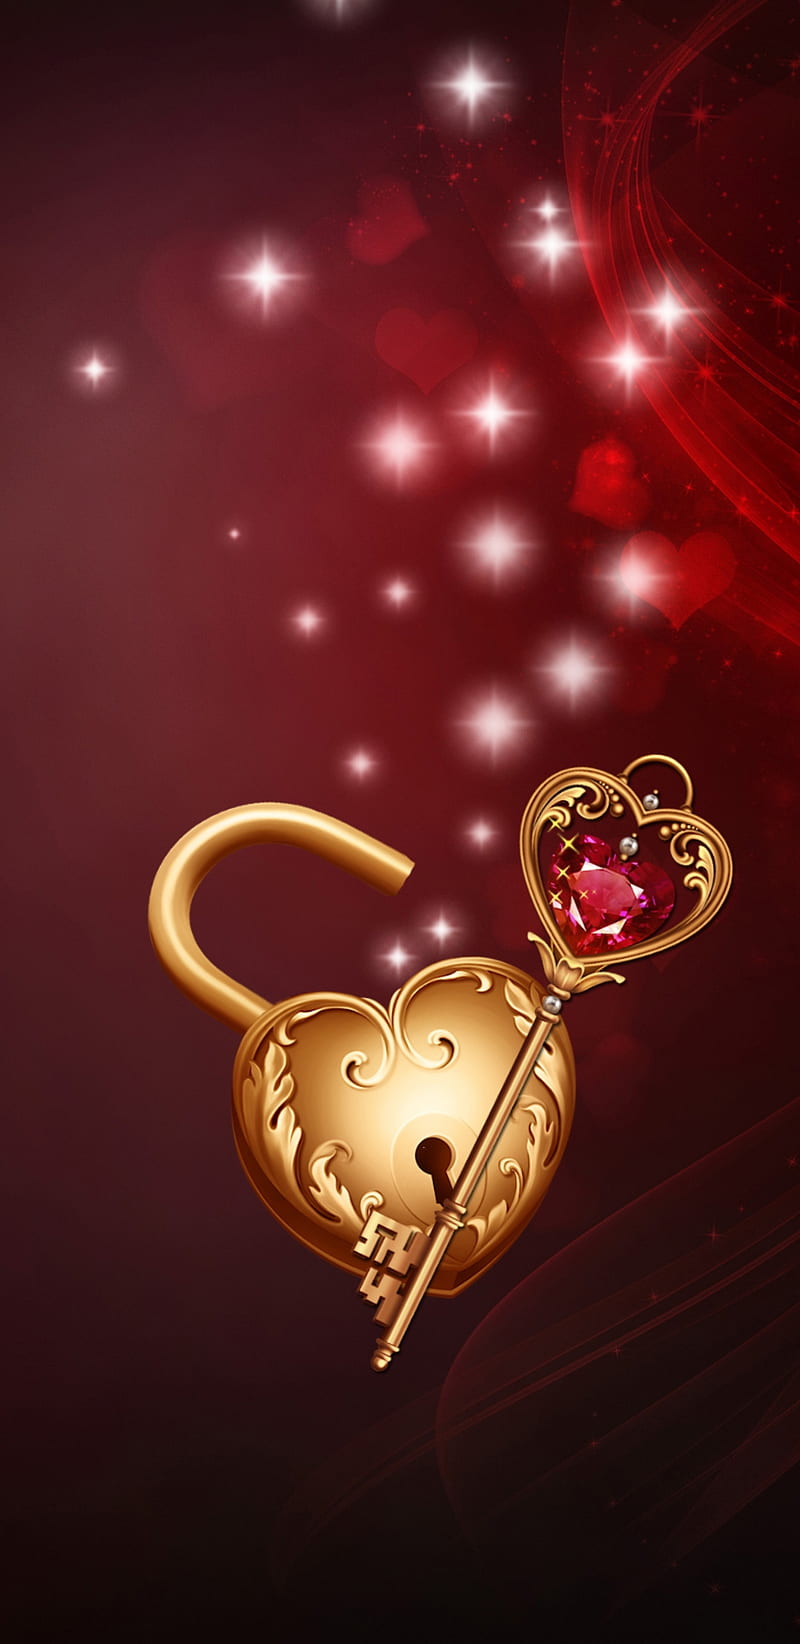 Locket Photos, Download The BEST Free Locket Stock Photos & HD Images